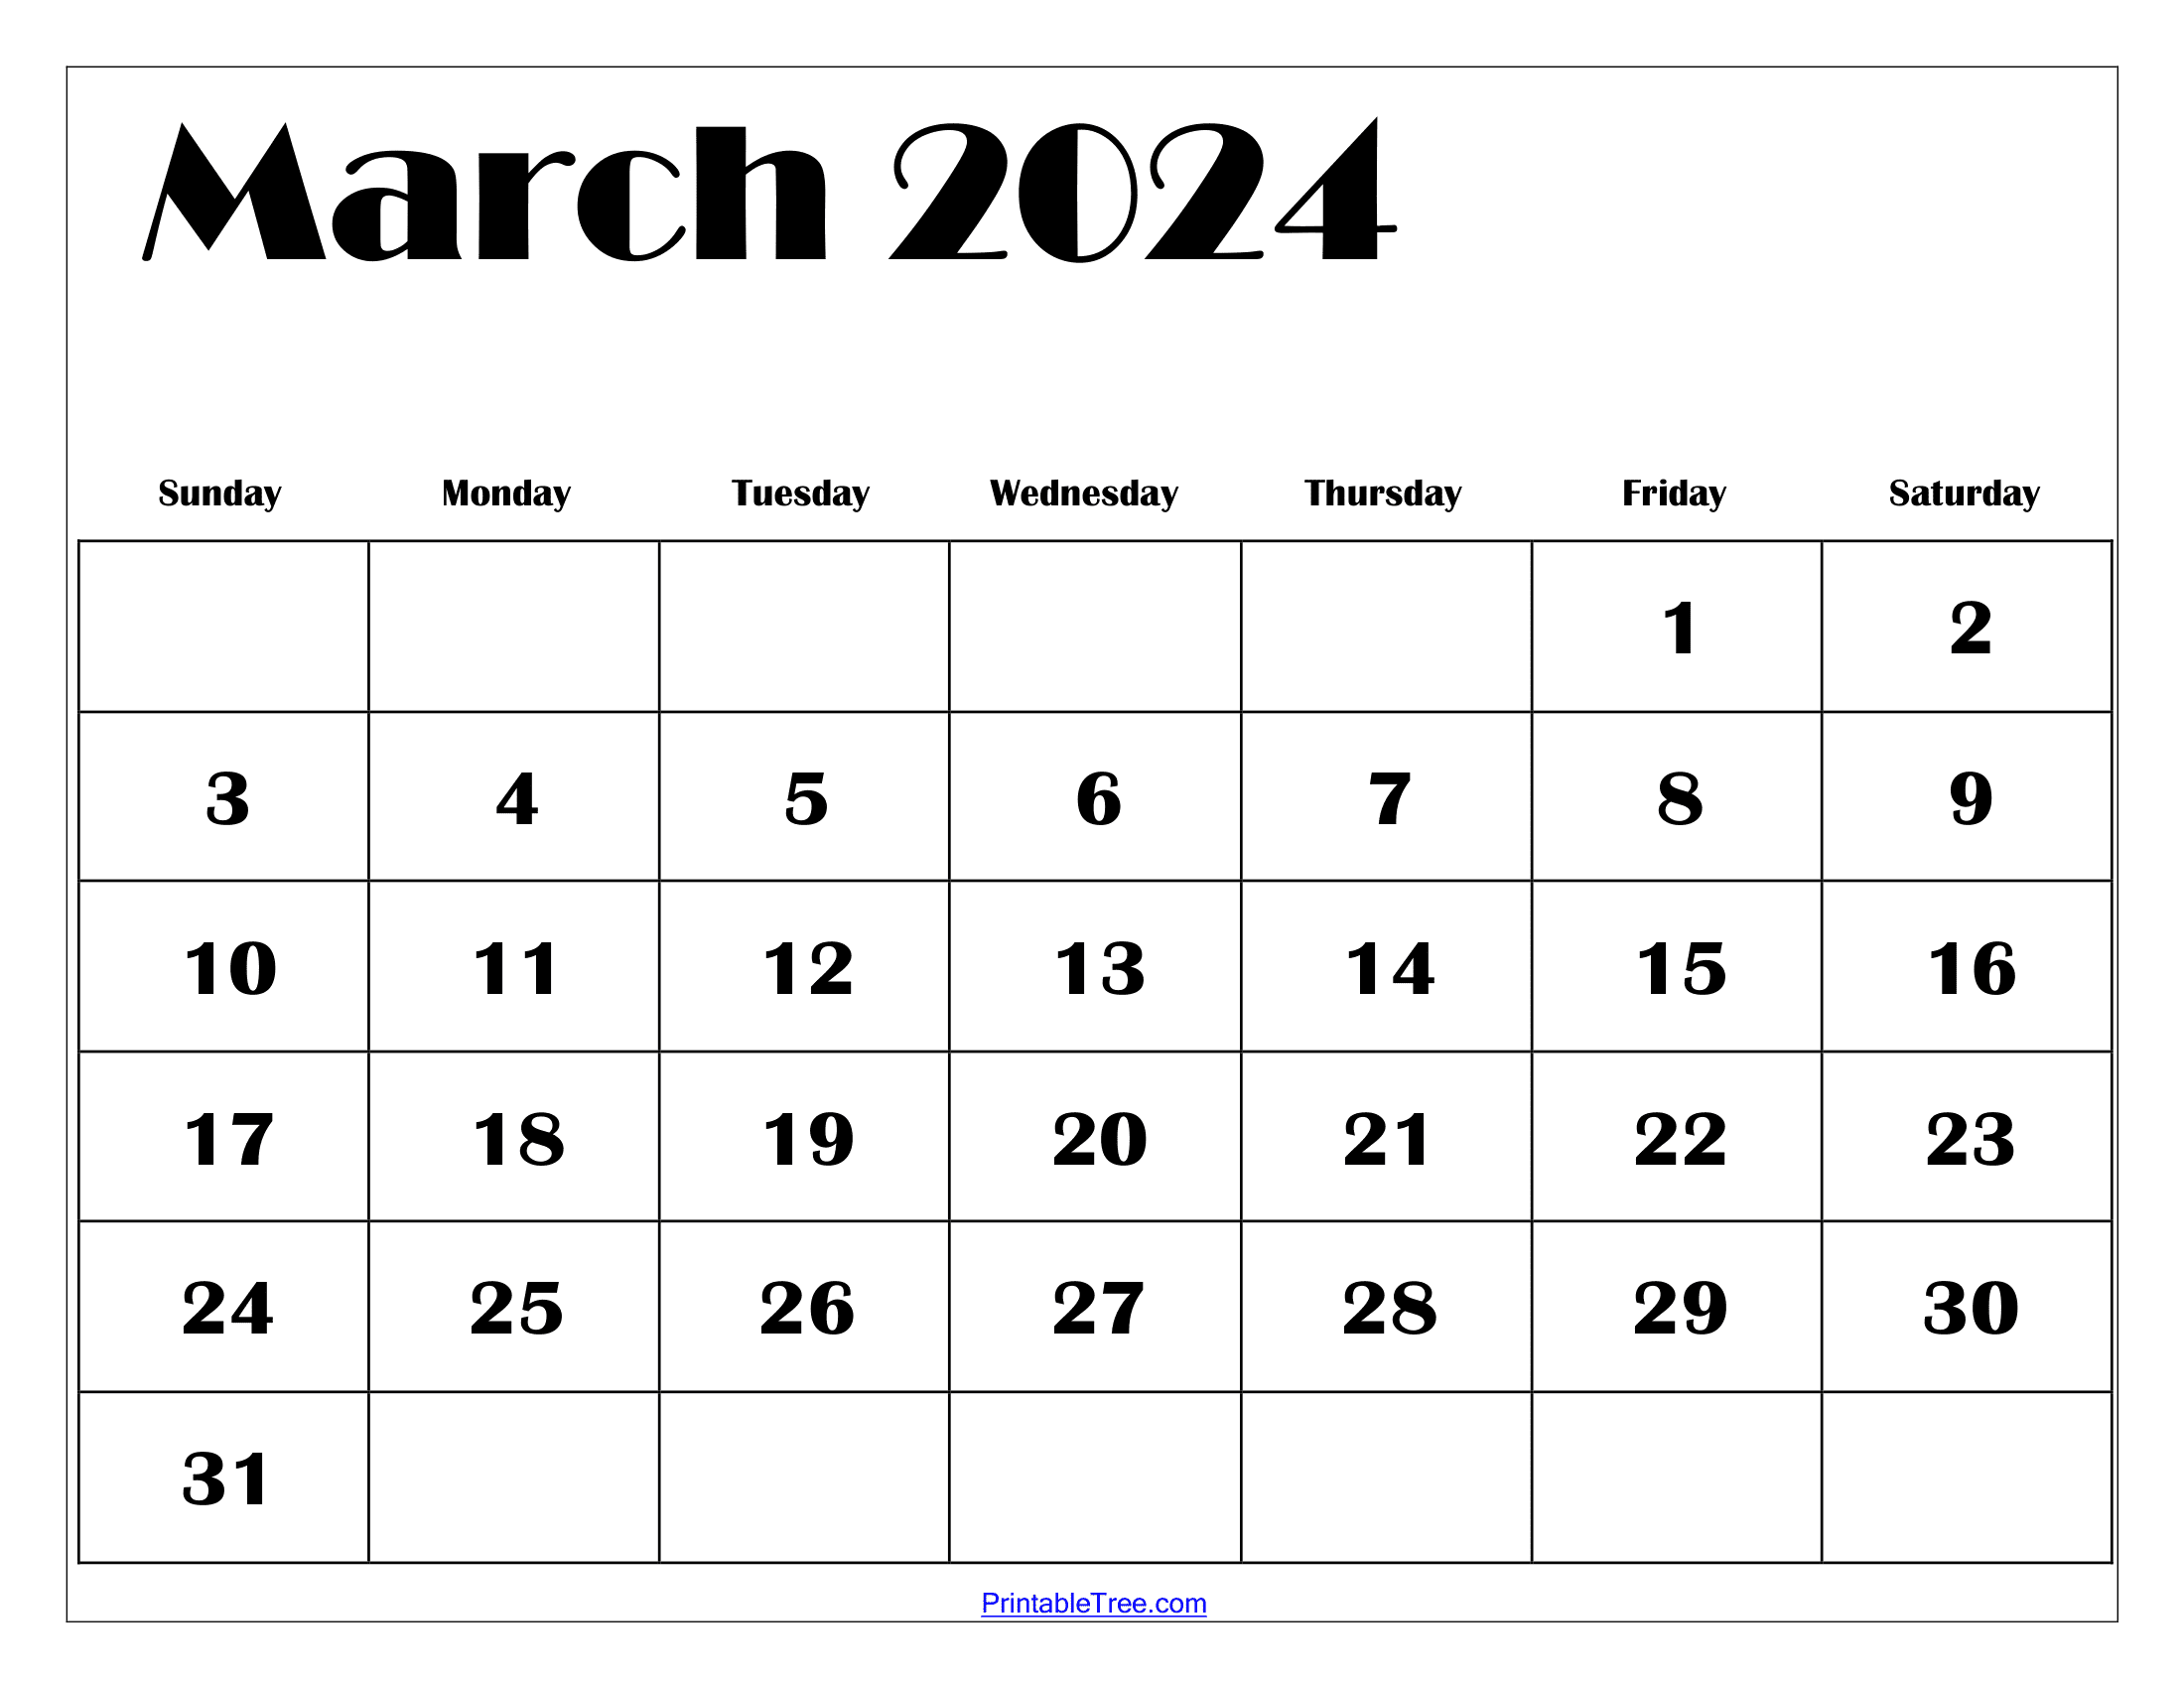 March 2024 Calendar Printable Pdf With Holidays Template Free for March 2024 Free Calendar Printable